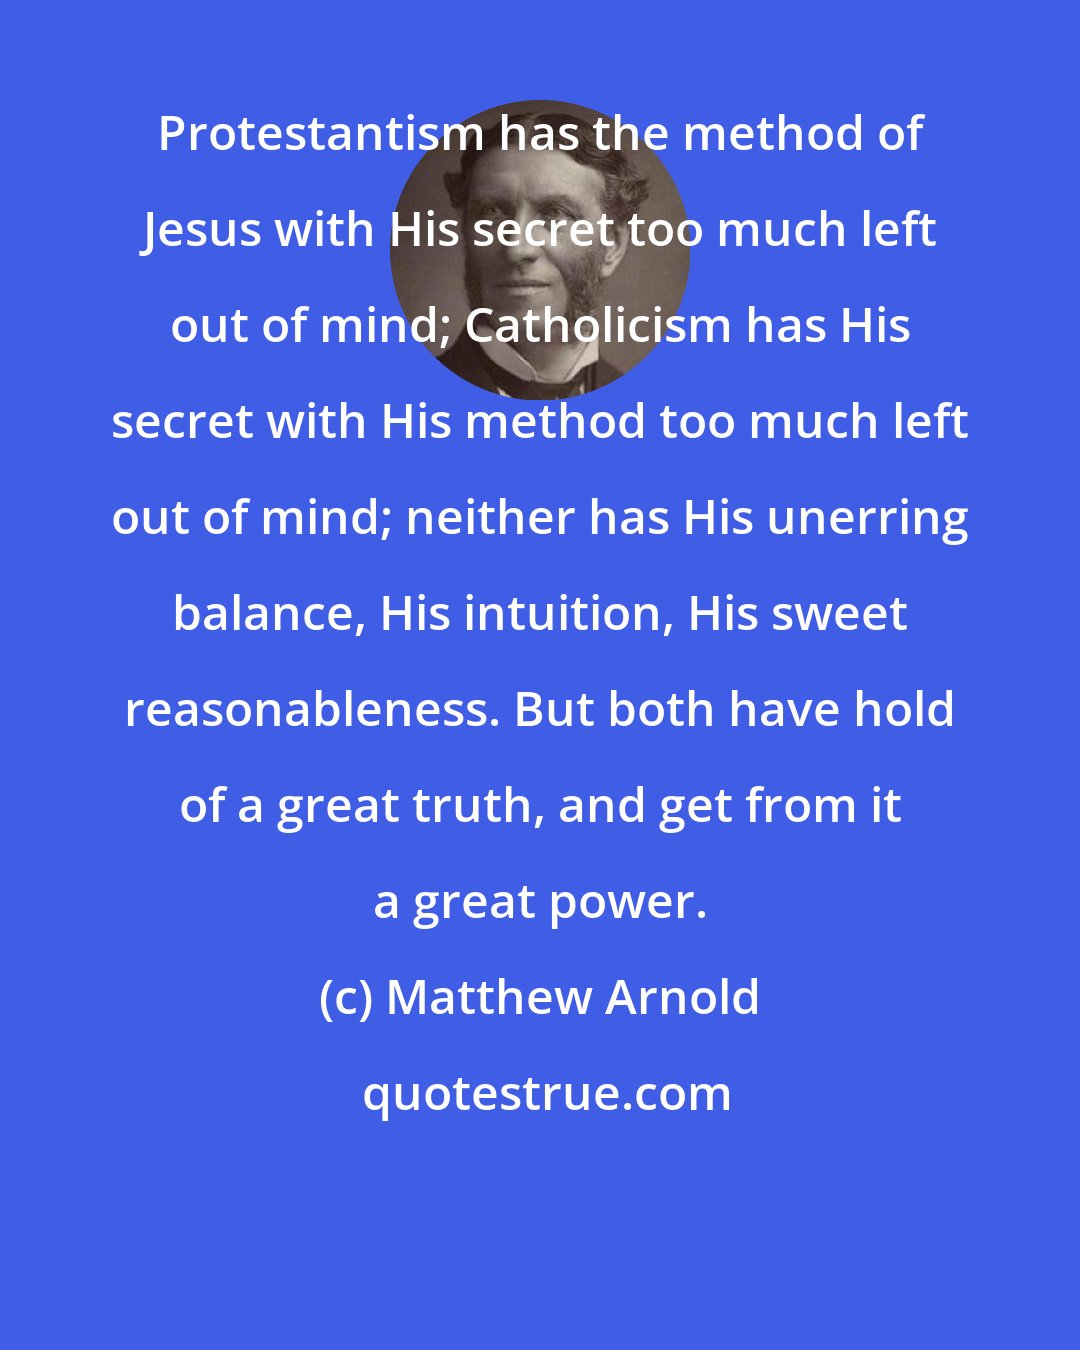 Matthew Arnold: Protestantism has the method of Jesus with His secret too much left out of mind; Catholicism has His secret with His method too much left out of mind; neither has His unerring balance, His intuition, His sweet reasonableness. But both have hold of a great truth, and get from it a great power.